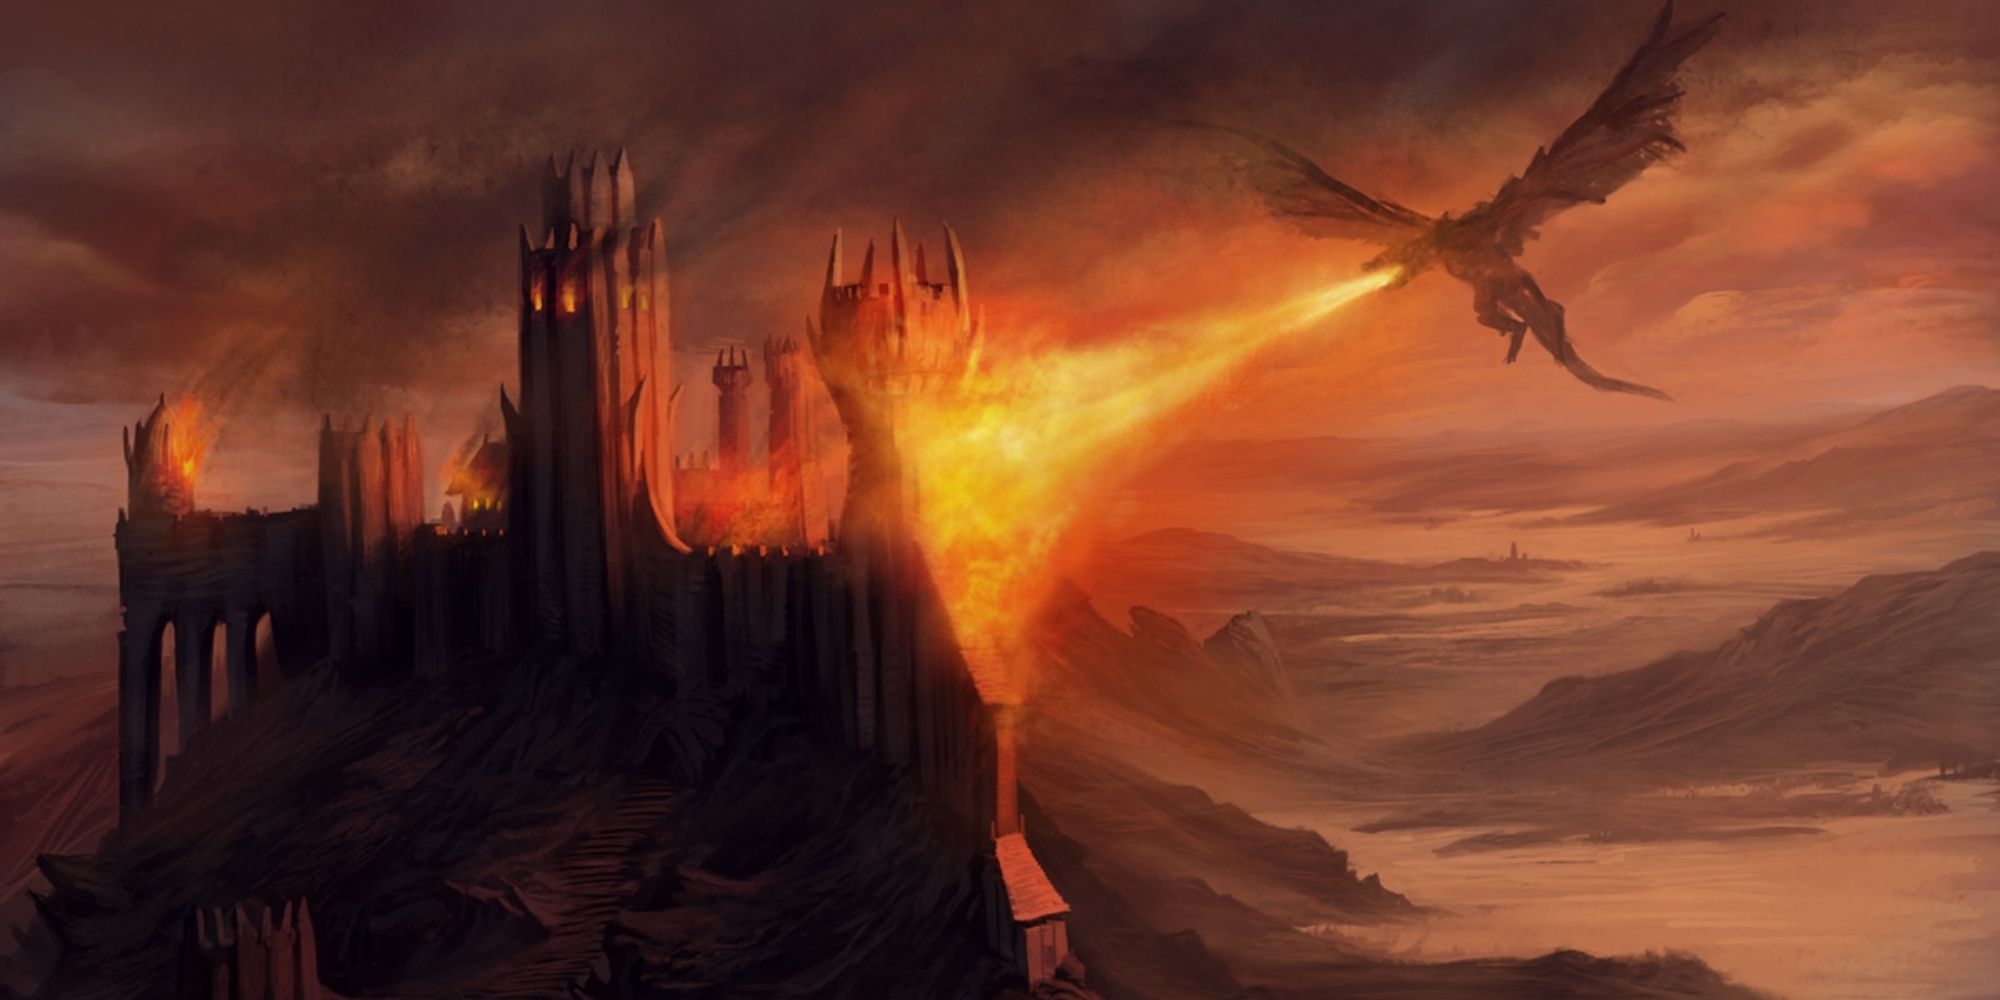 An image of Balerion burning a castle in the Game of Thrones books